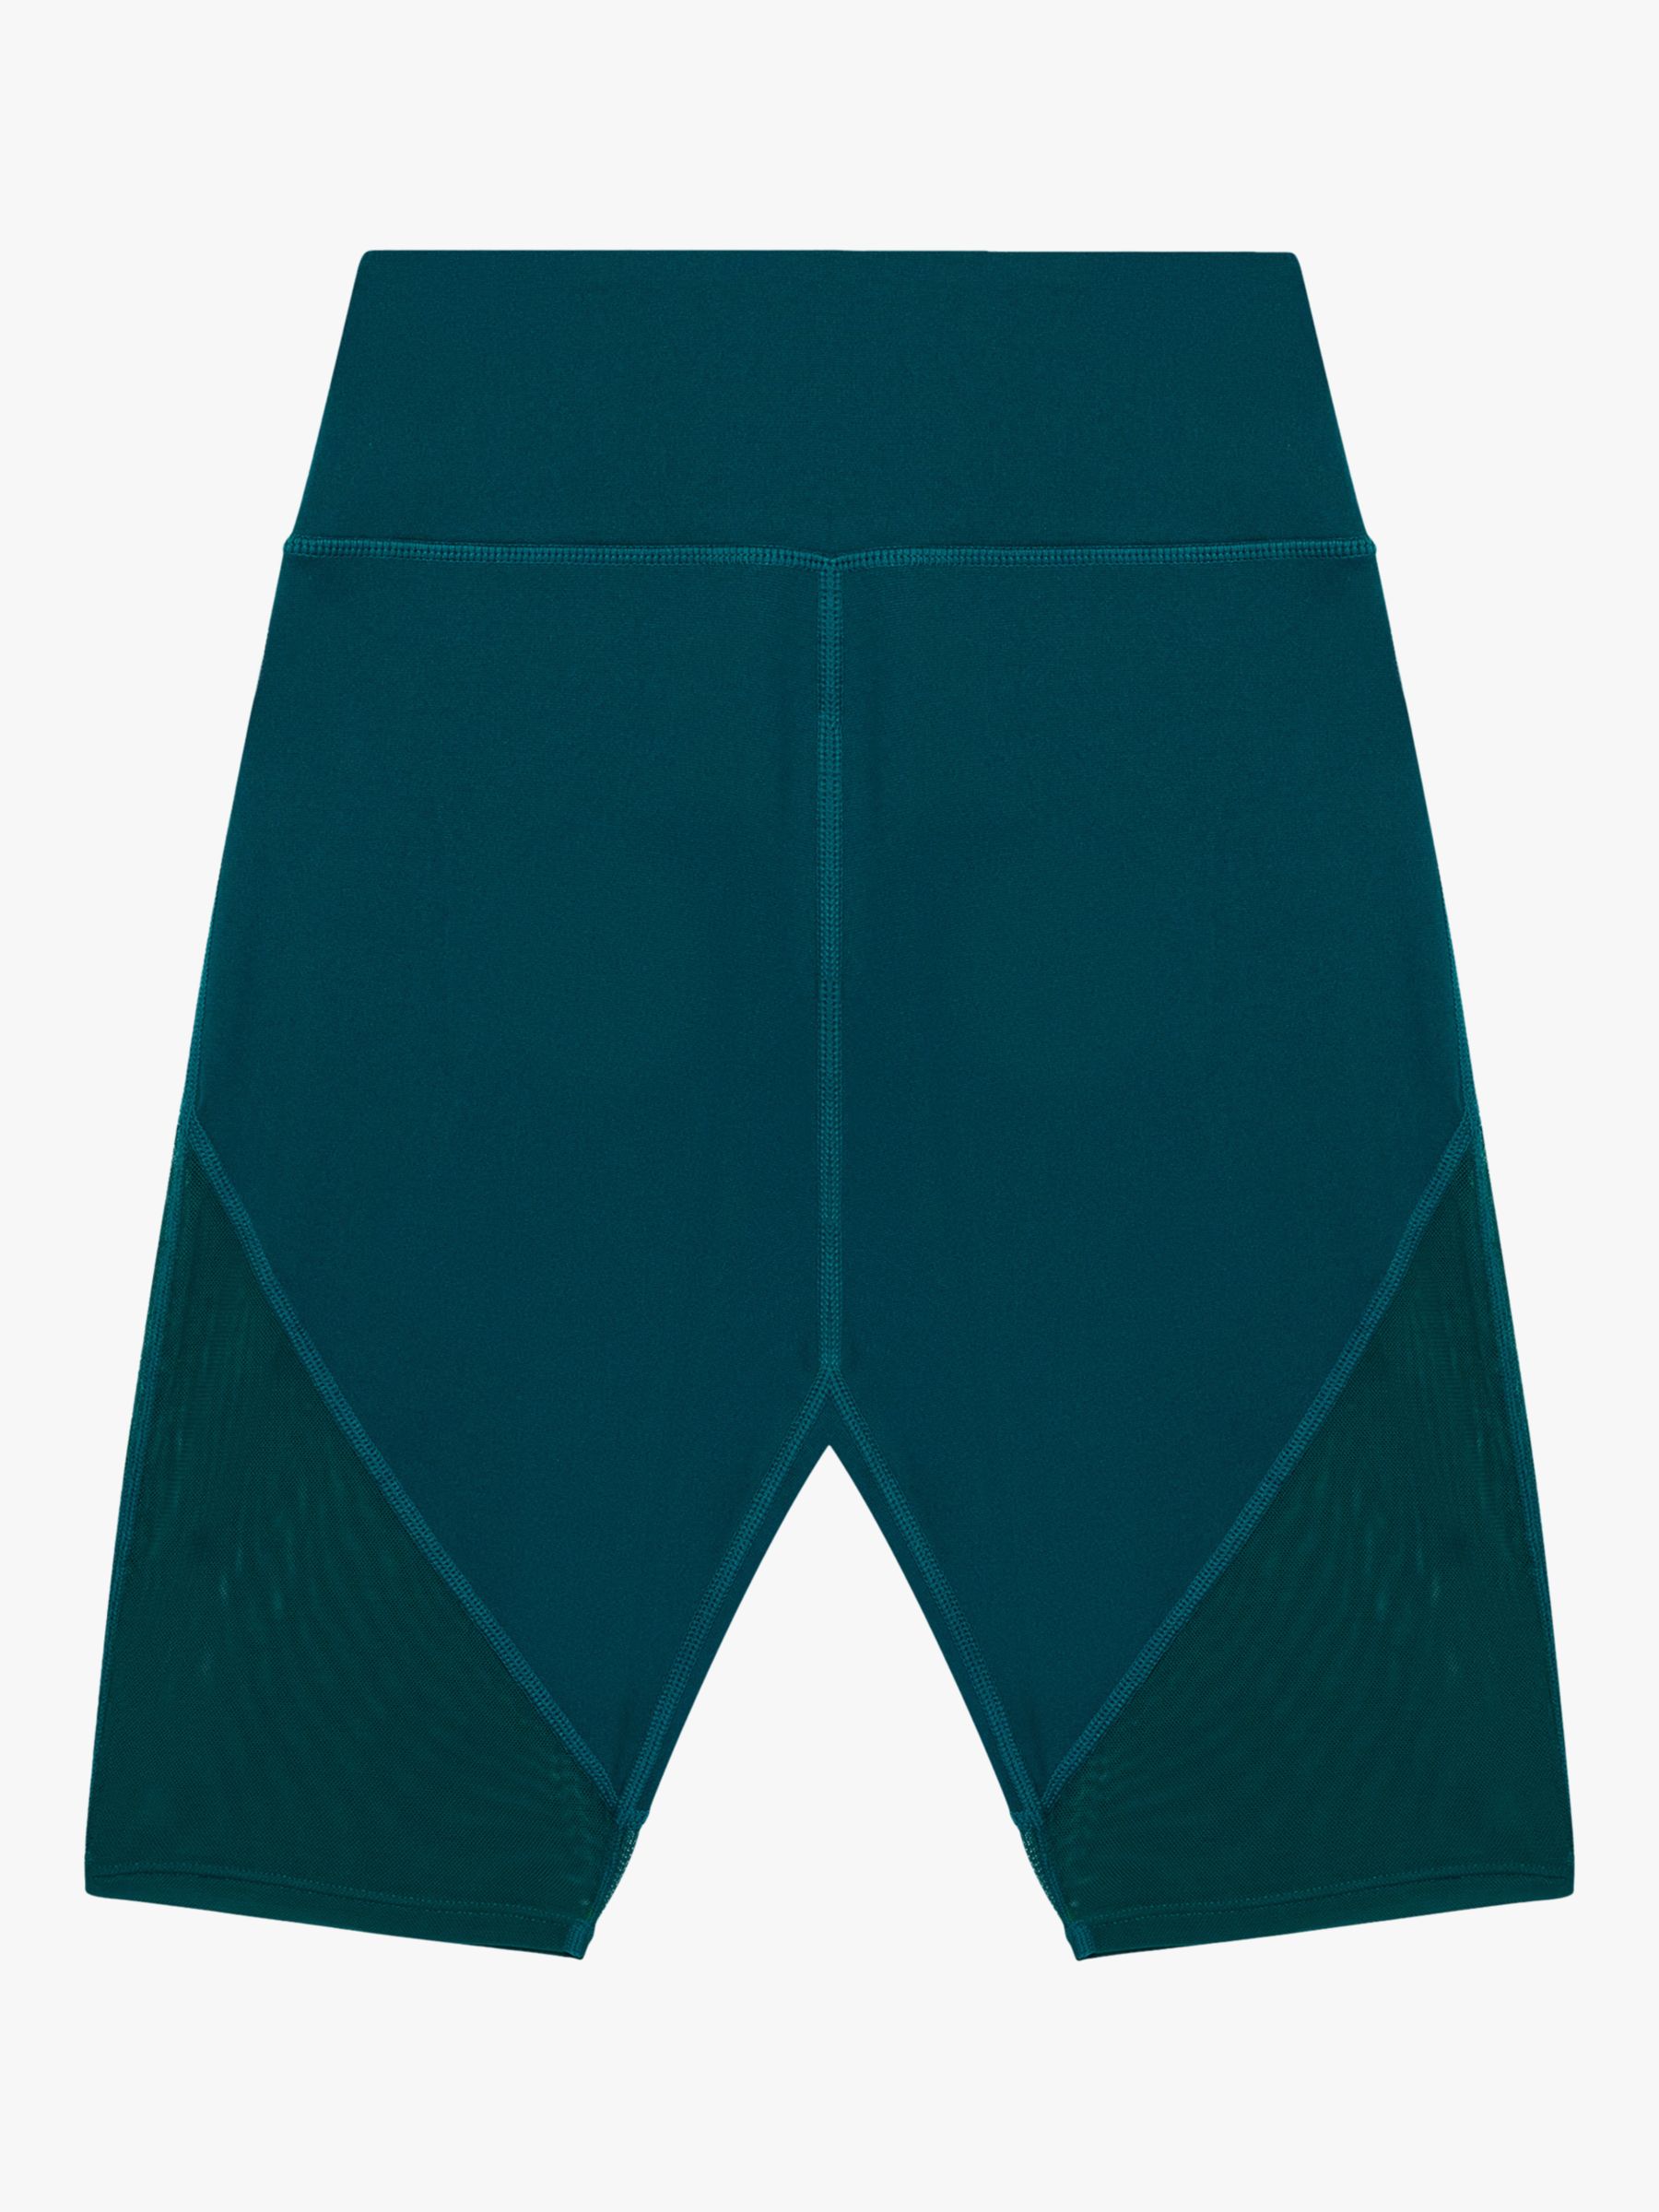 Wolf & Whistle Mix and Match Mesh Panel Shorts, Teal, 8